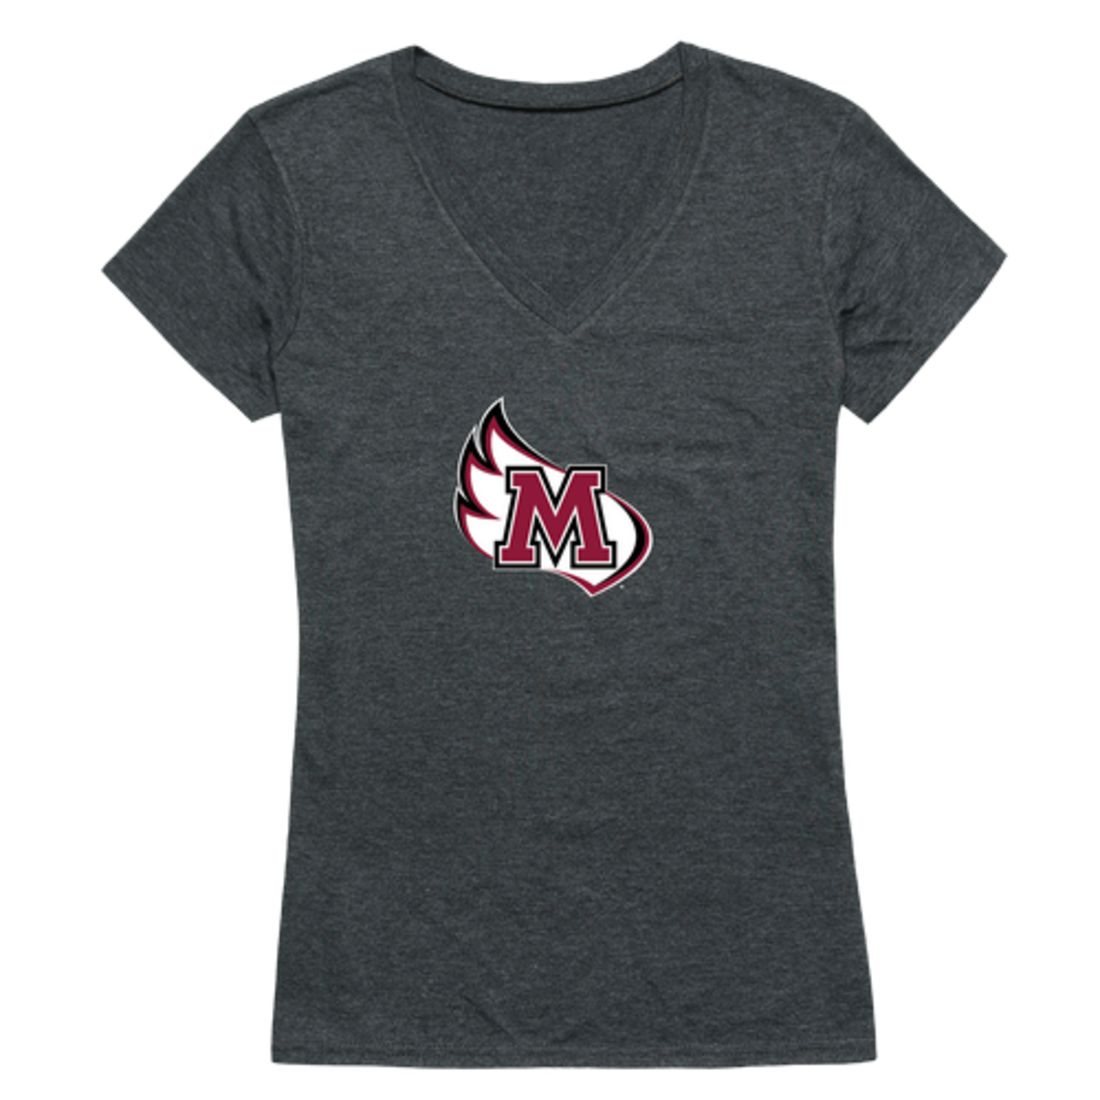 Meredith College Avenging Angels Womens Cinder T-Shirt Tee